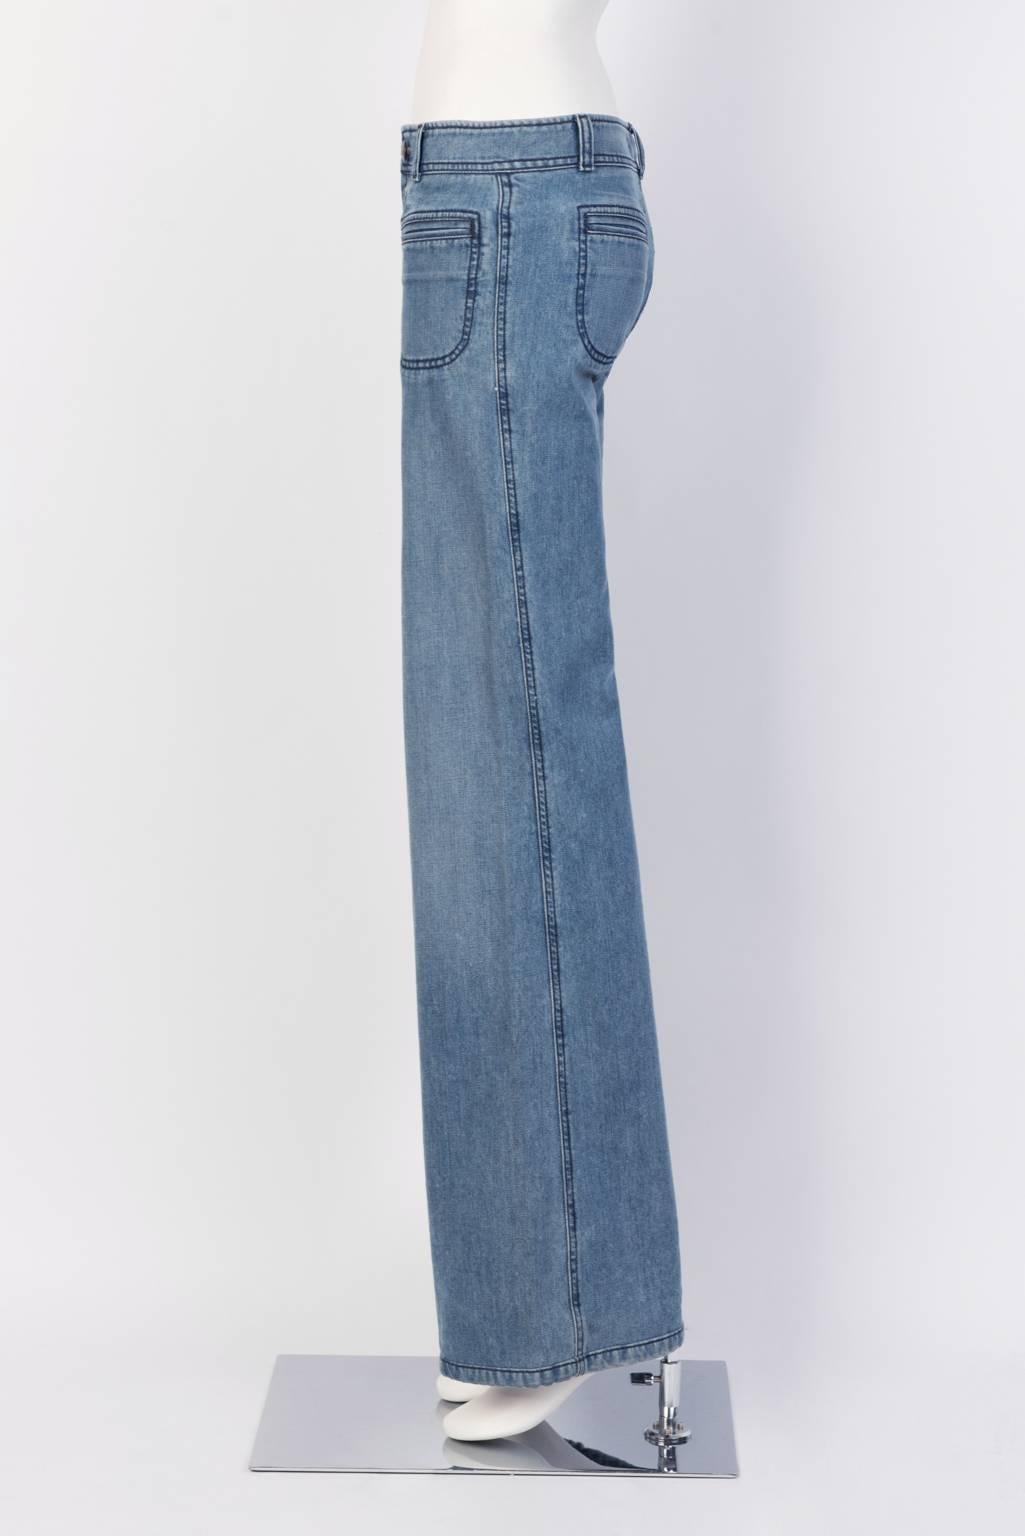 Chloé low waist flair jeans in washed cotton denim. 